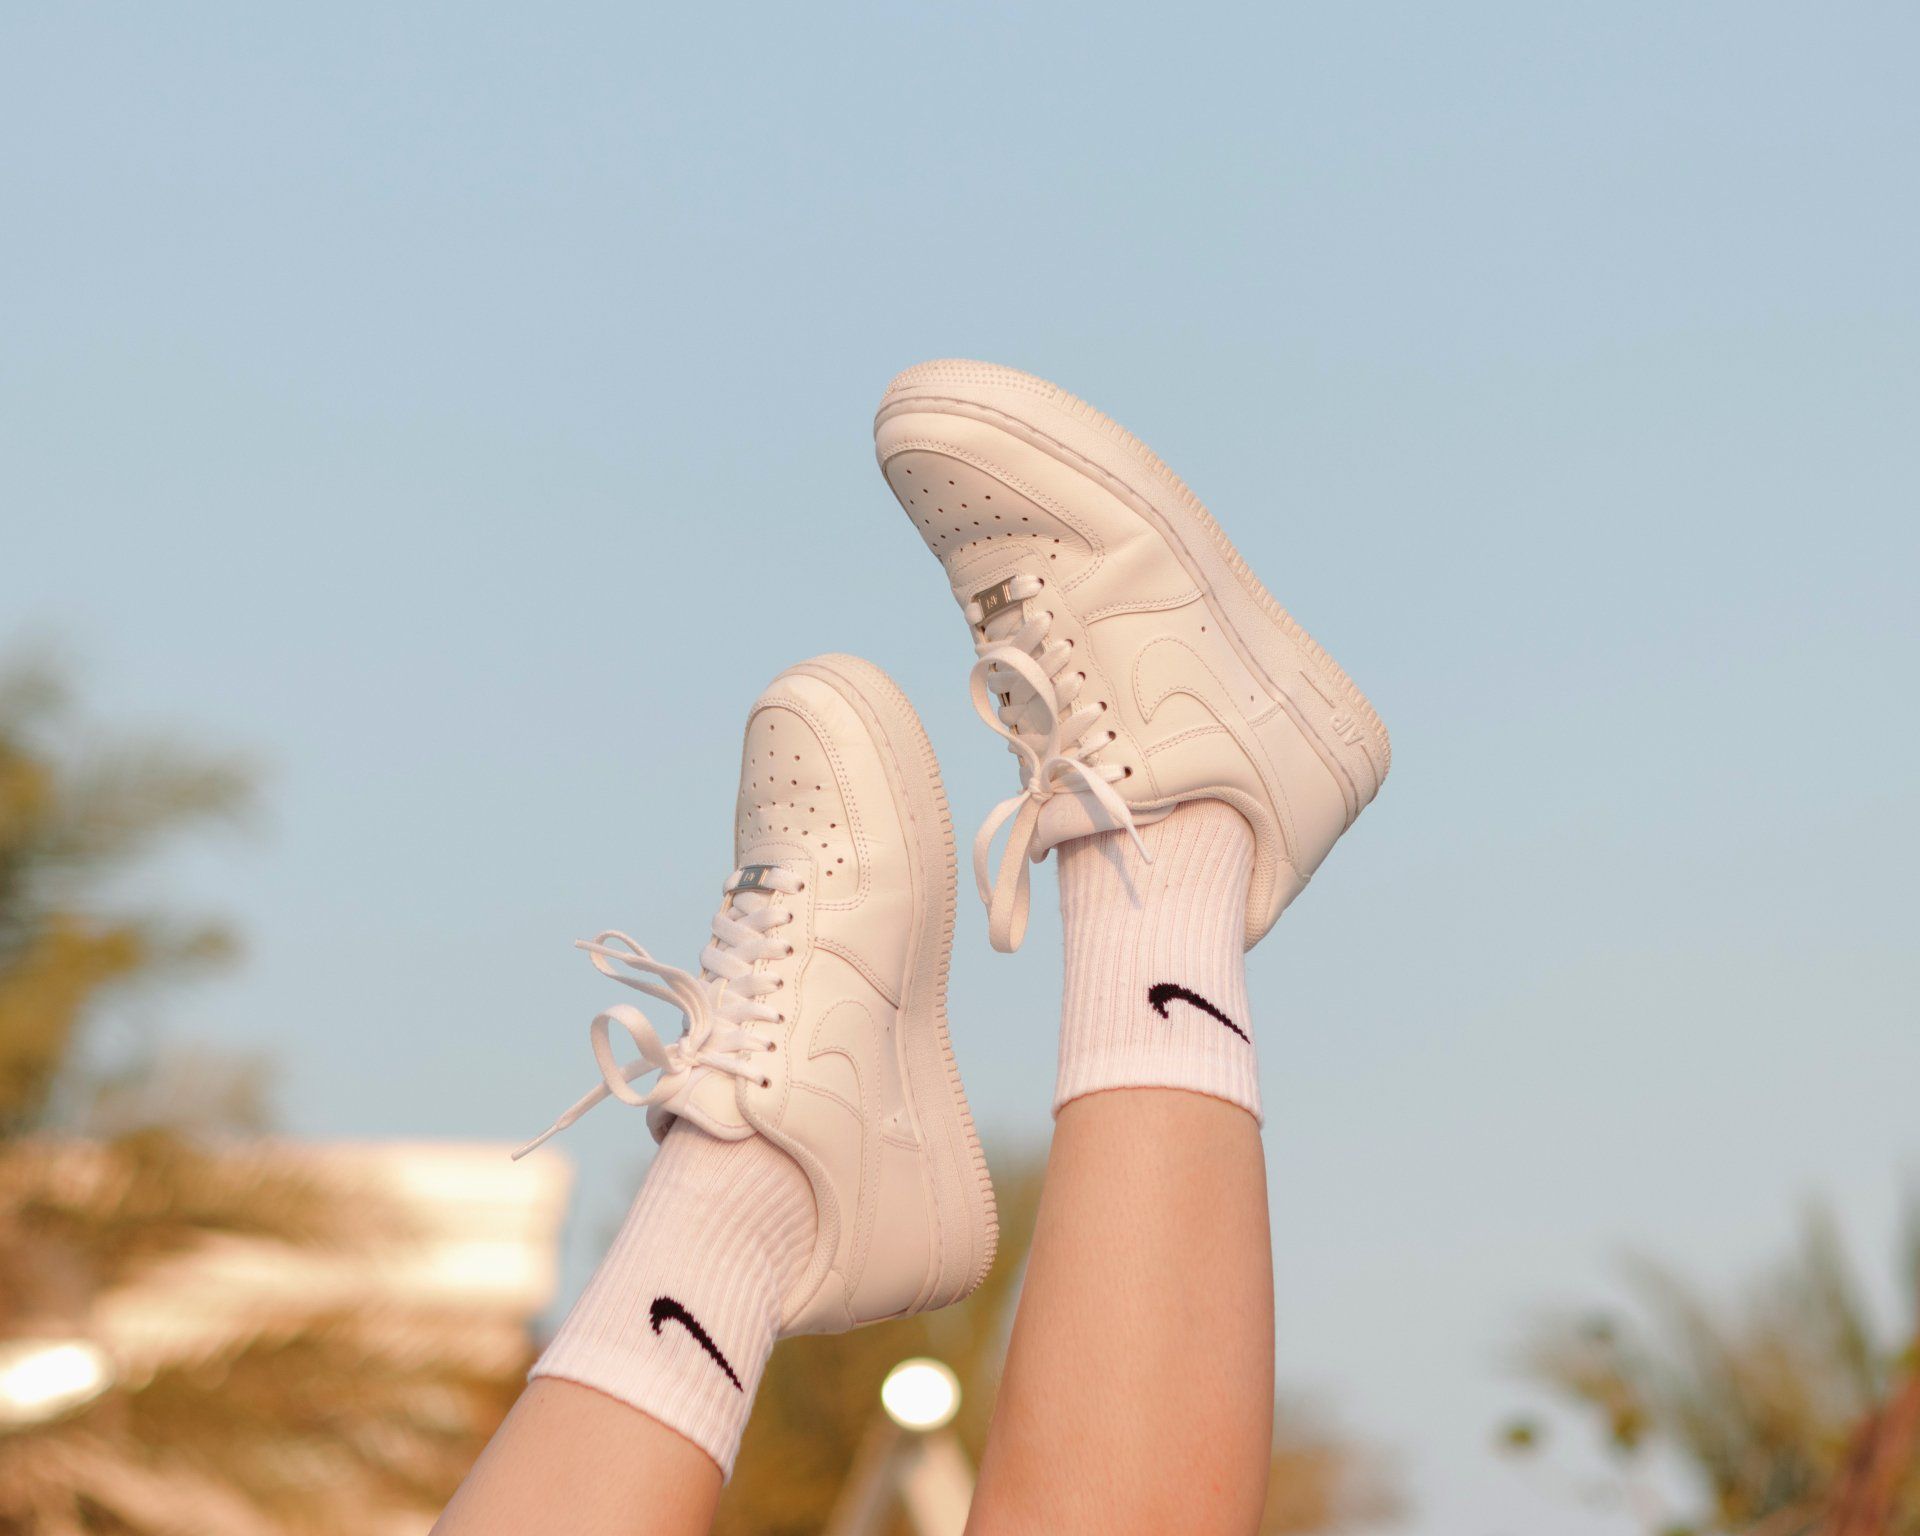 A person is wearing white nike shoes and white socks.